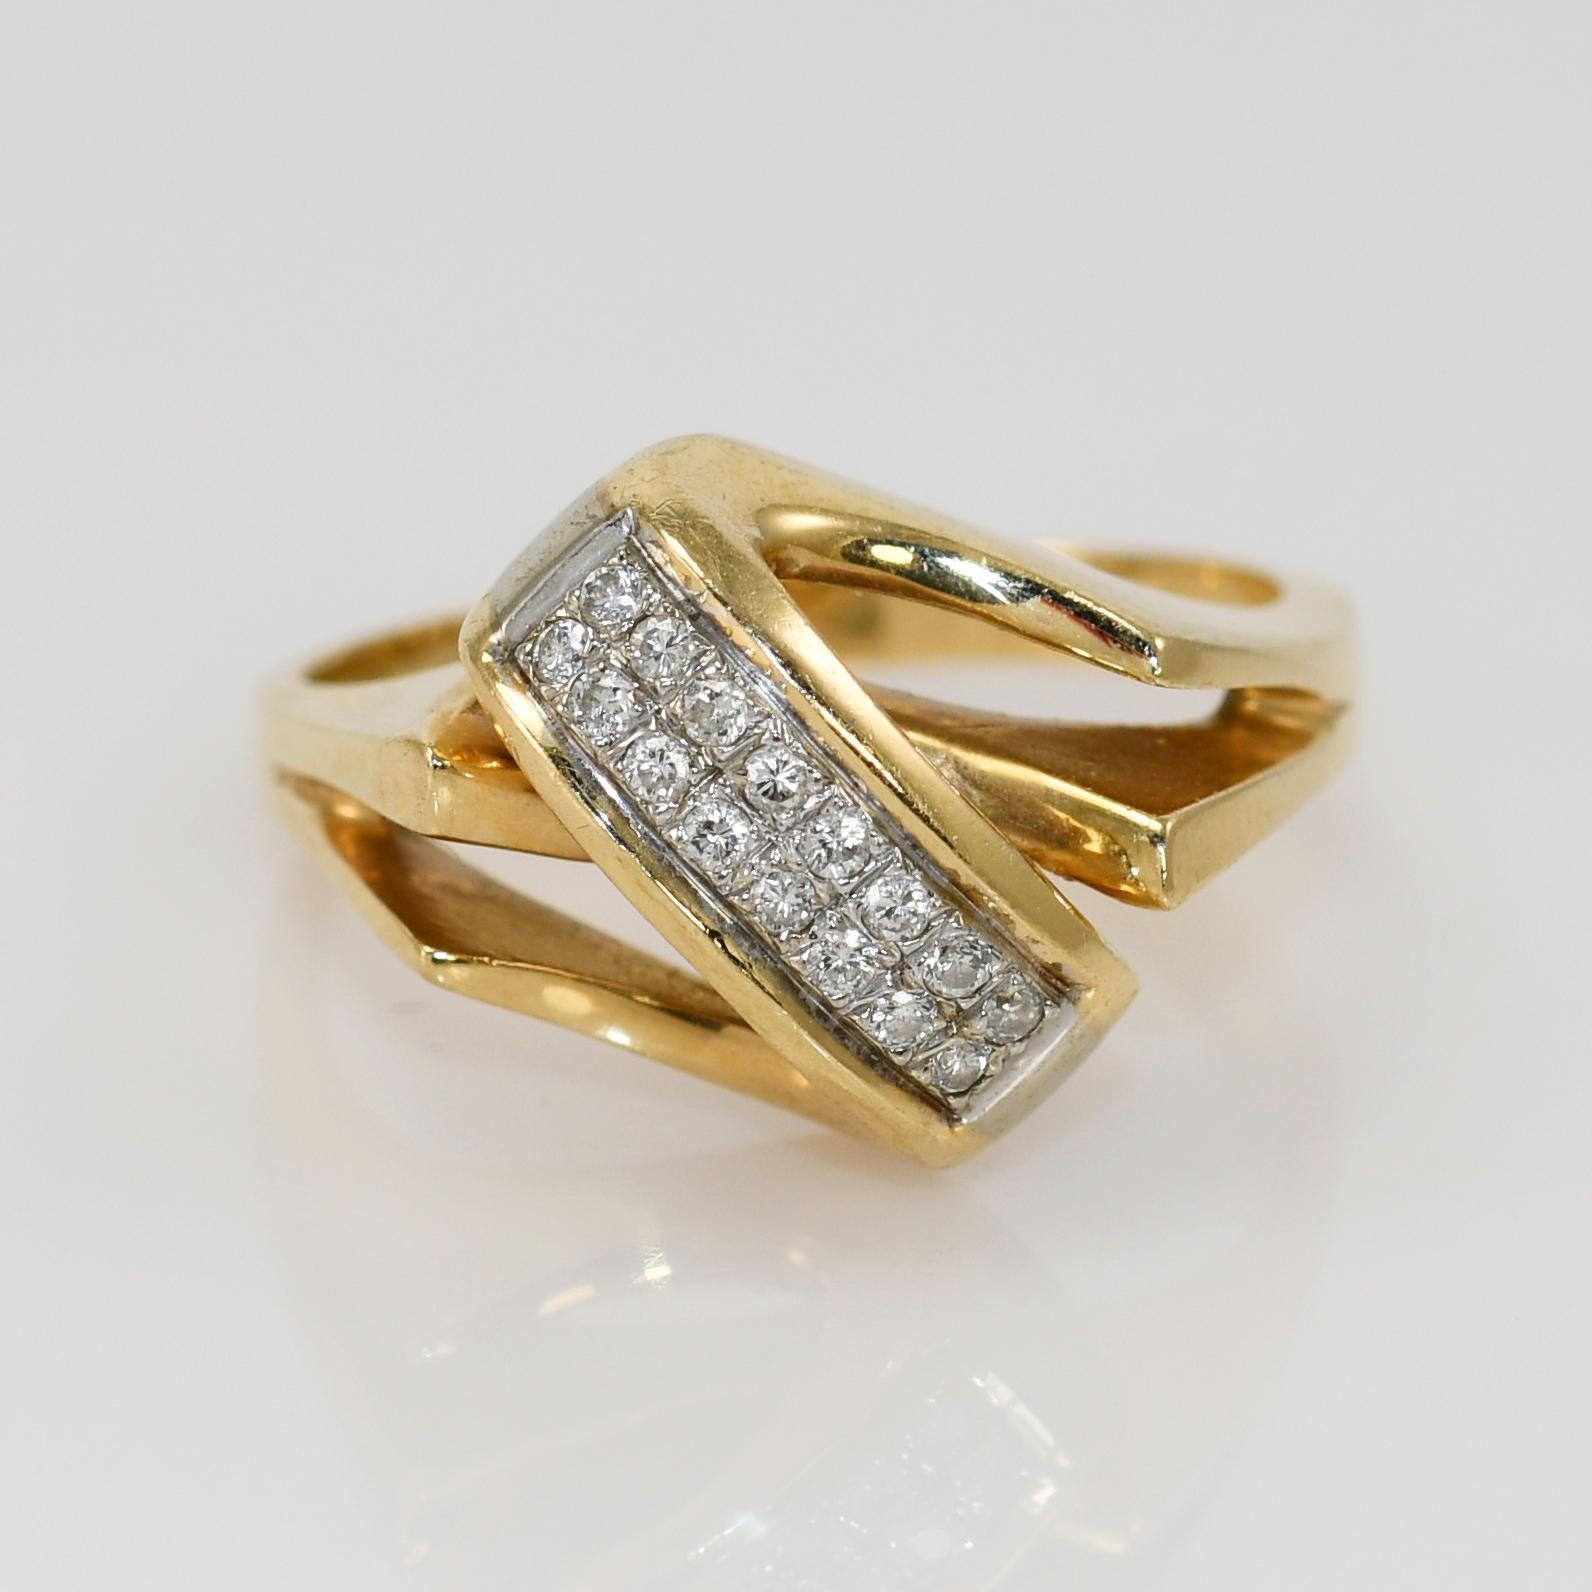 14K Yellow Gold Diamond Ring 5.4gr .15tdw In Excellent Condition For Sale In Laguna Beach, CA